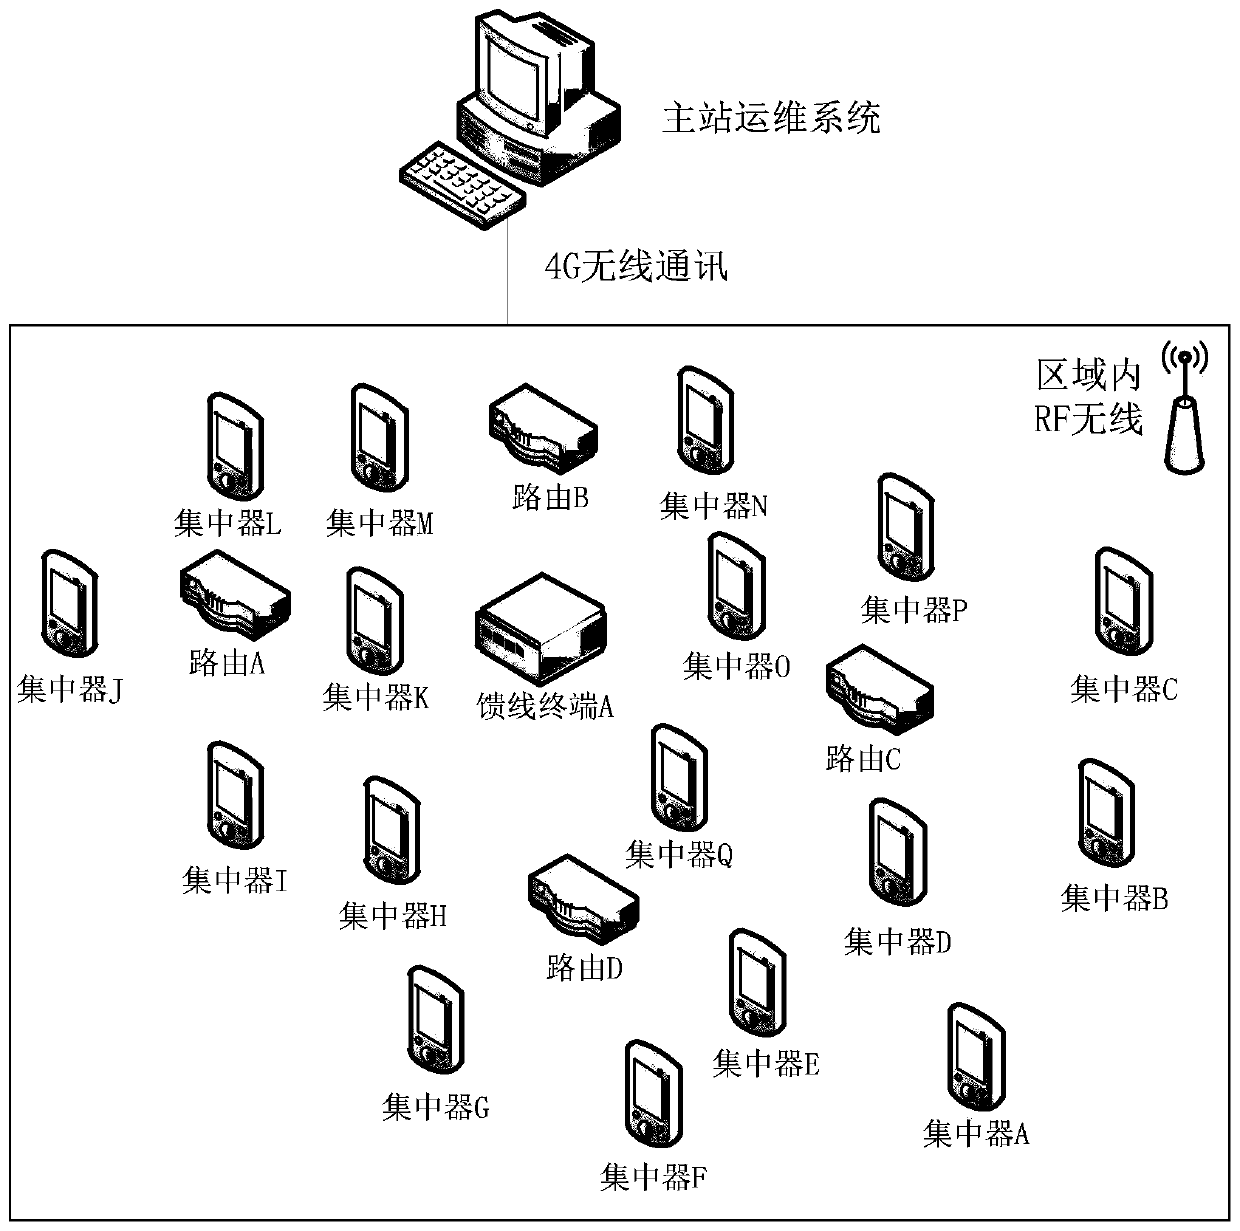 A power distribution and utilization equipment management method based on Internet of Things communication and a container technology